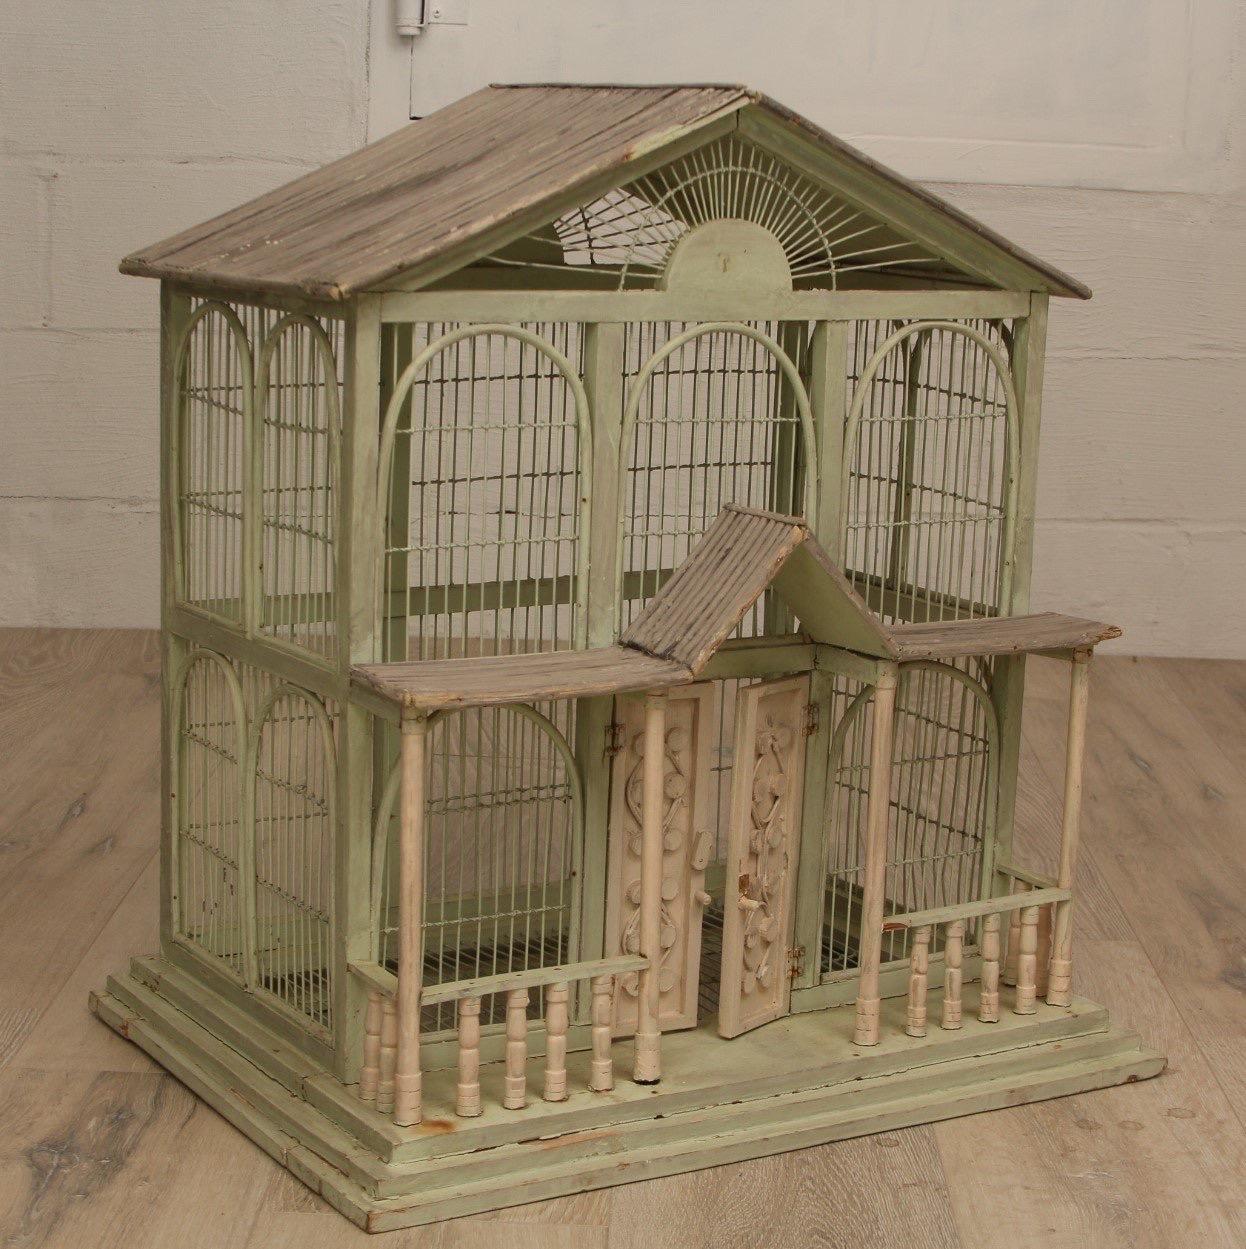 A handmade wooden birdhouse made in a 19th century American vernacular style.

USA, circa 1950.

Age related wear and vintage charm.

Dimensions: 24” L x 18” W x 26” H
